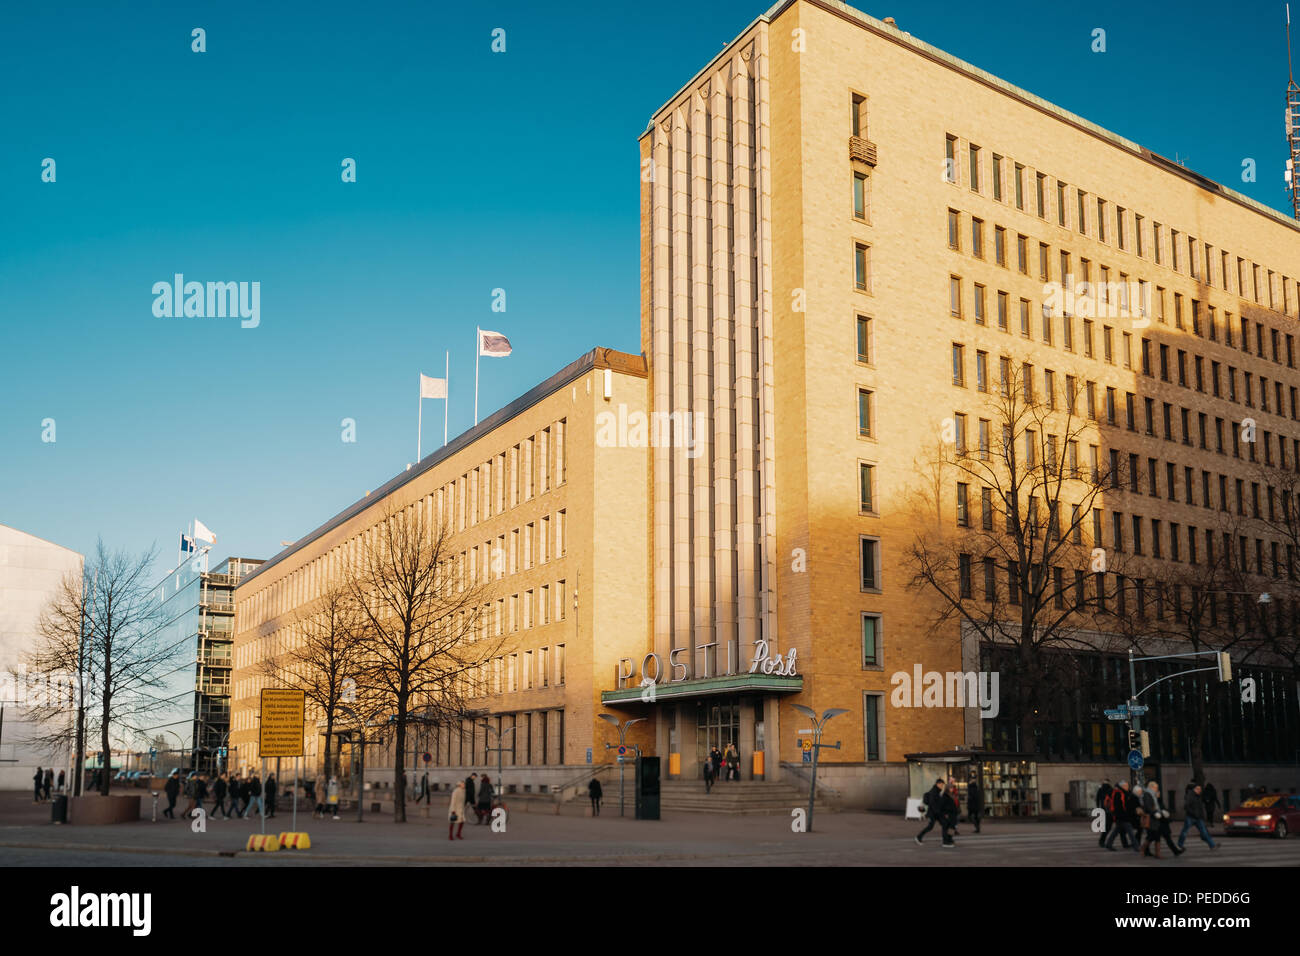 Helsinki, Finland. Post Office Building In Sunny Winter Day. Stock Photo